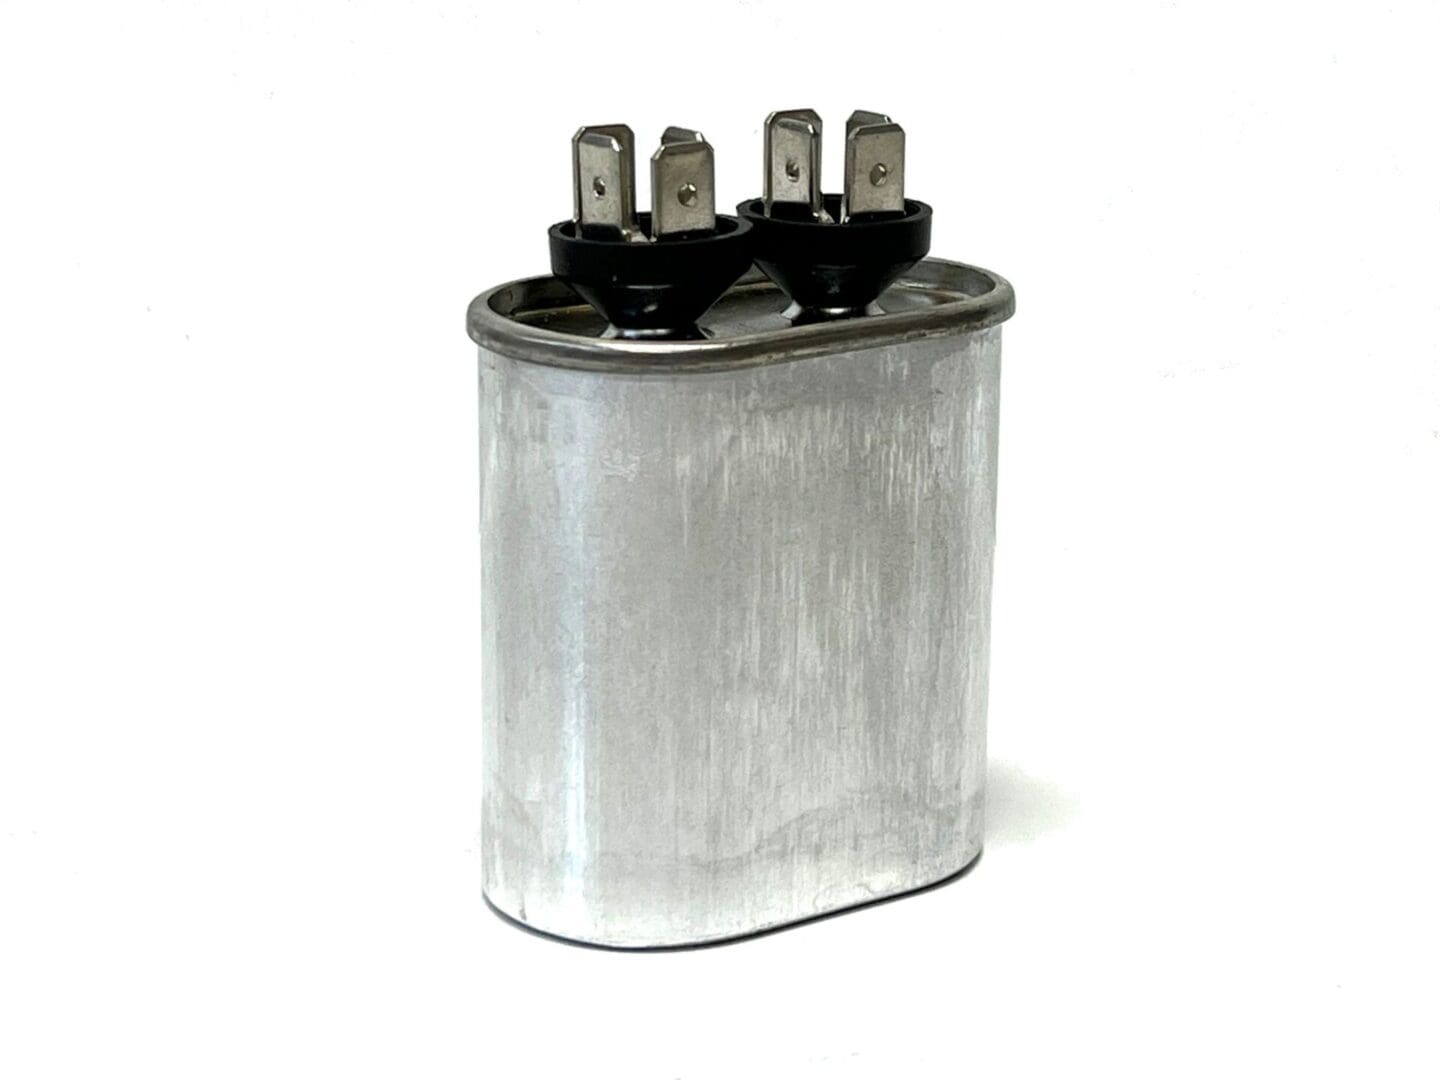 A close up of an electrical capacitor on a white background